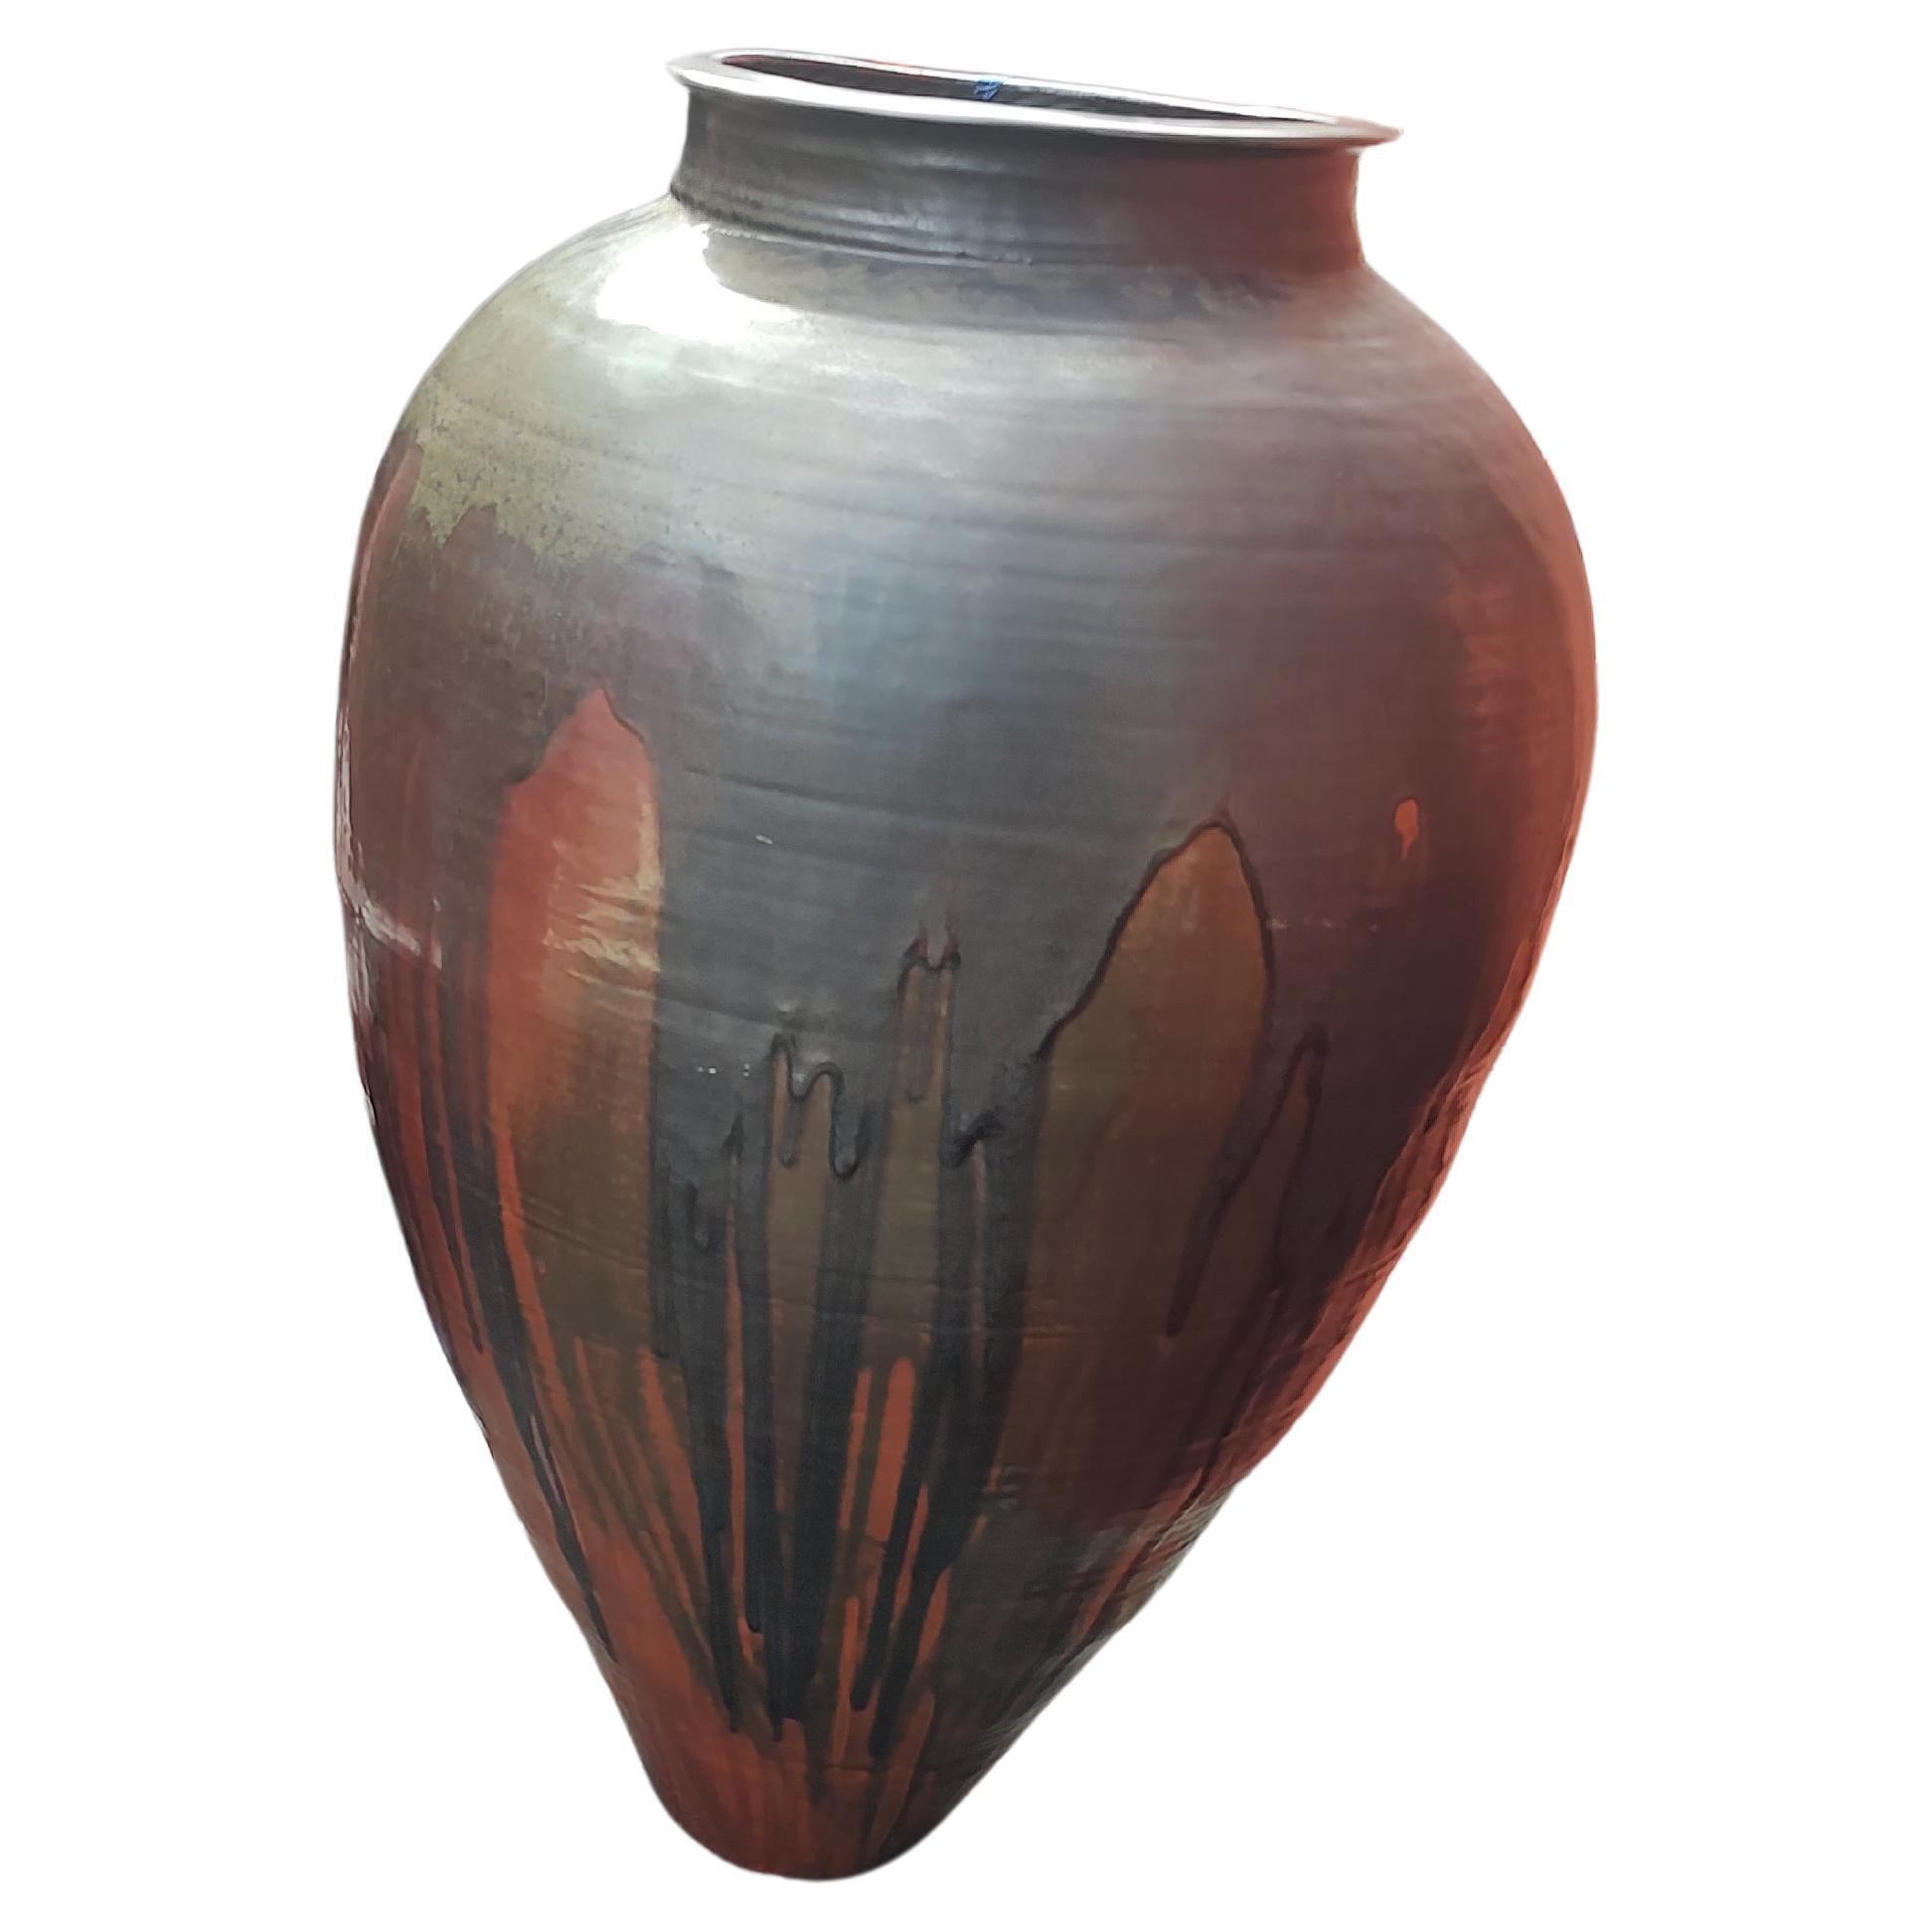 Massive Mid Century Modern Sculptural Hand Thrown Drip Glaze Vase - Urn In Good Condition For Sale In Port Jervis, NY